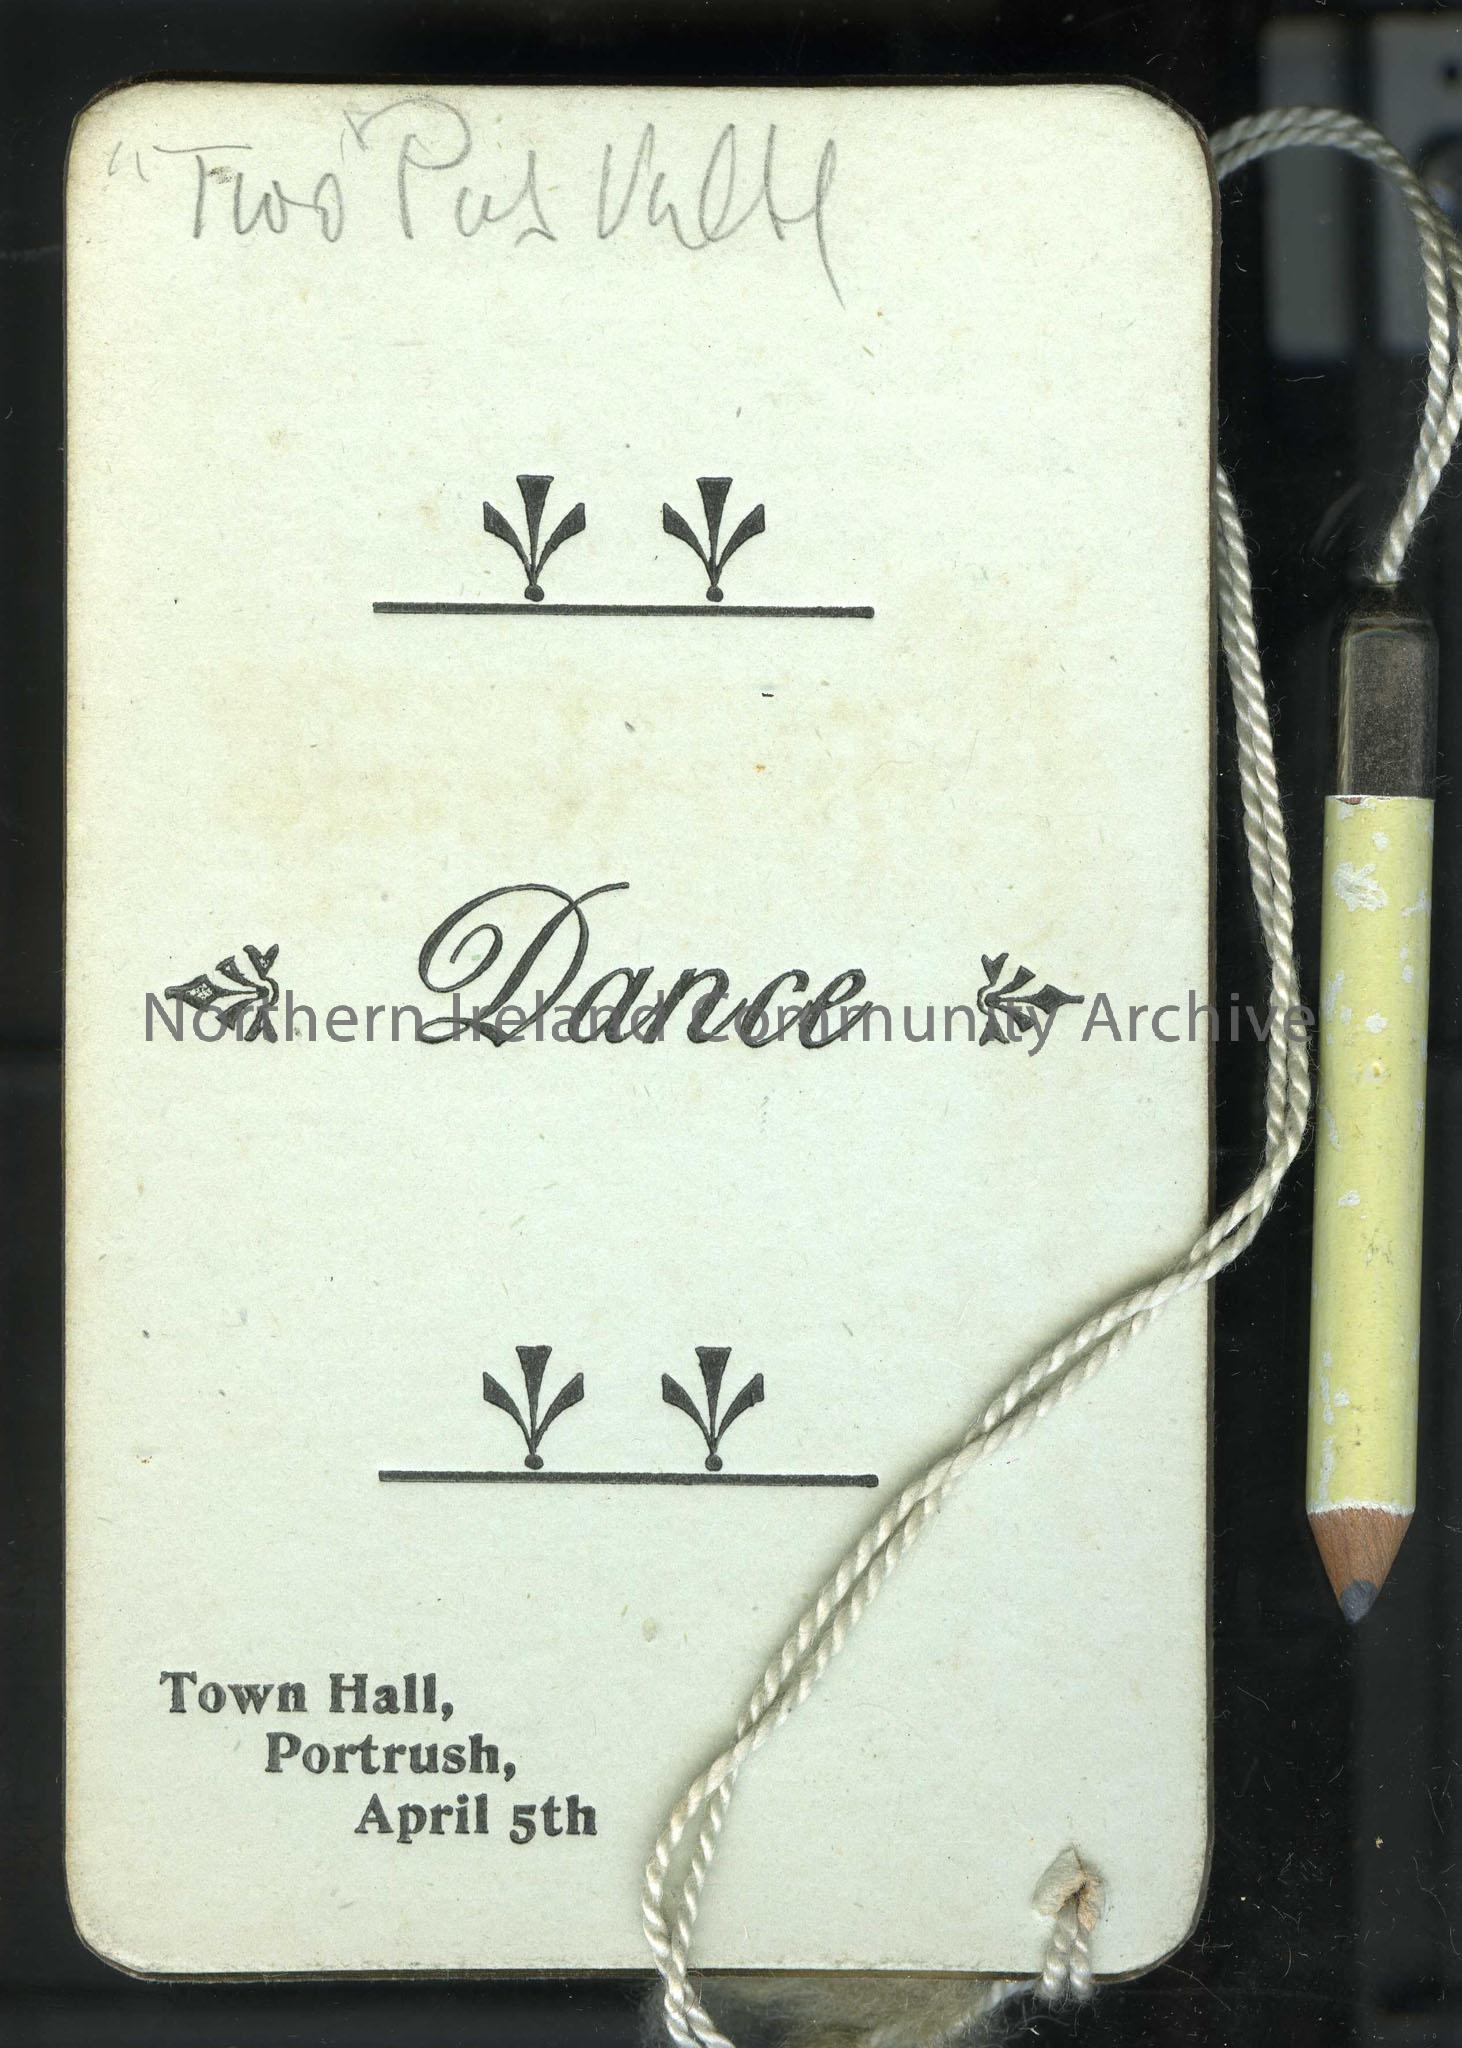 Dance card or programme.  Town Hall, Portrush, April 5th.  Names on back and pencil attached.